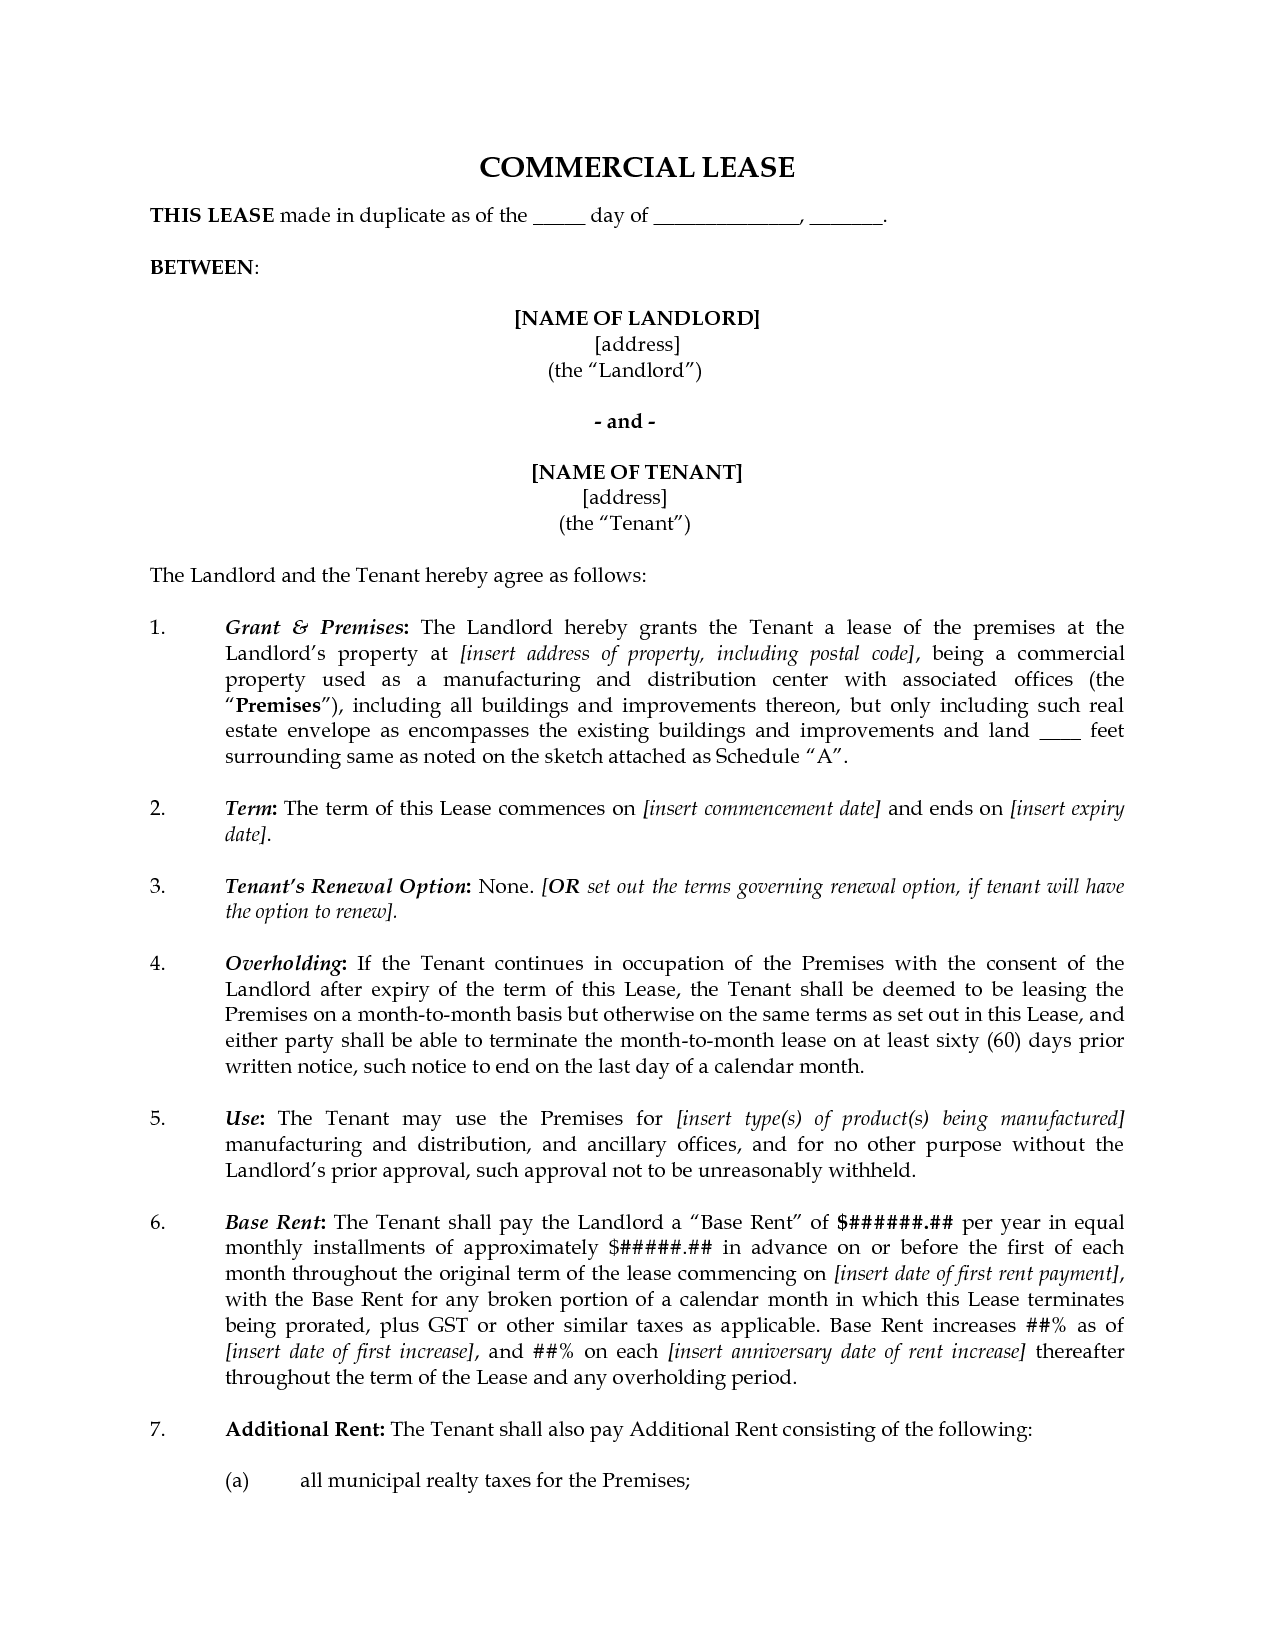 commercial-restaurant-lease-agreement-free-printable-documents